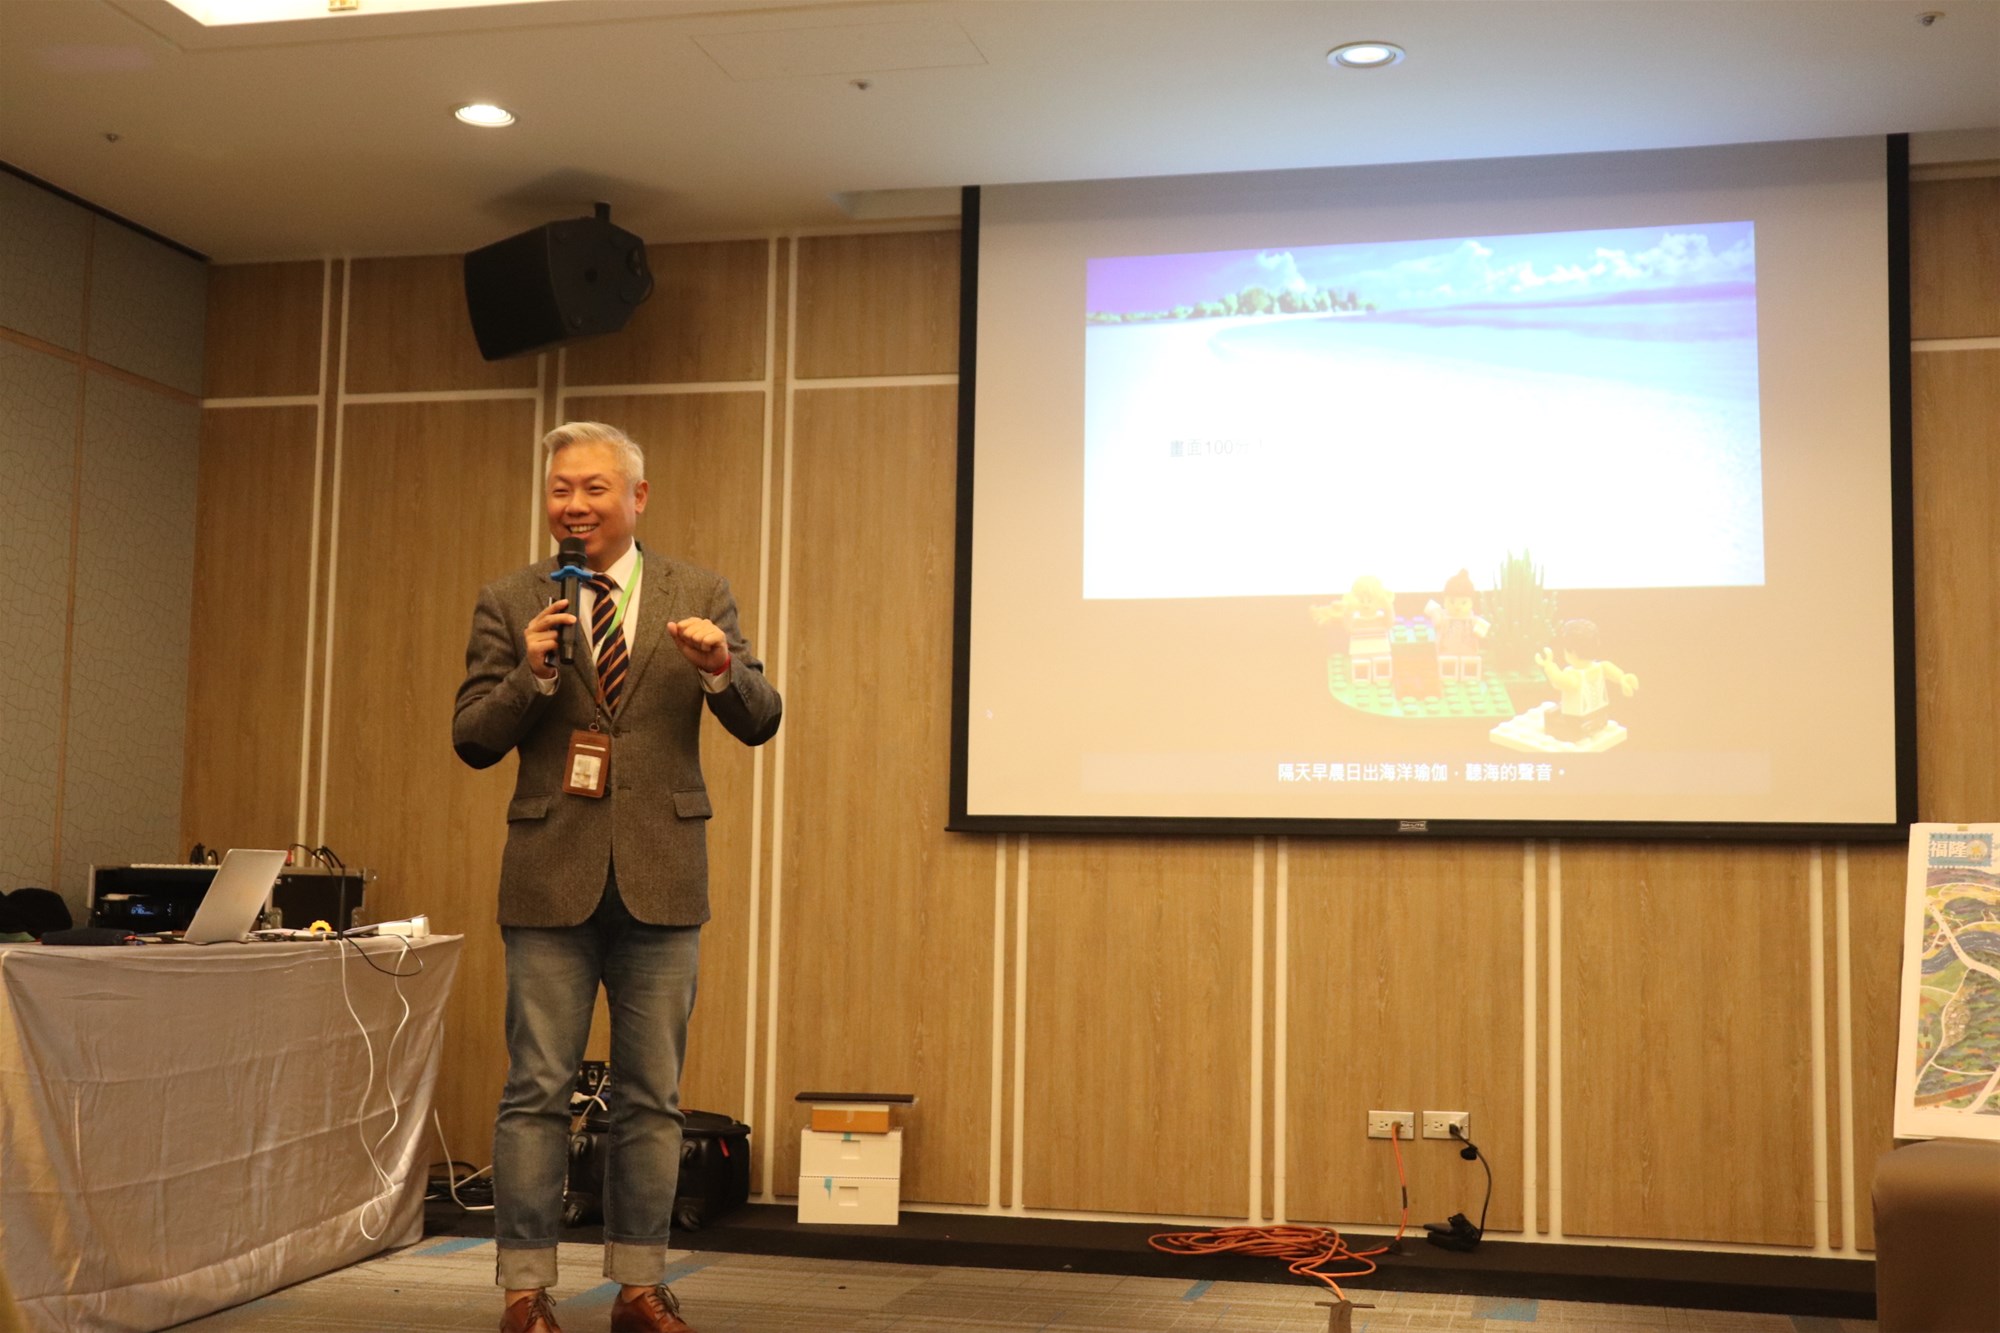 Photos of the speech given by the General Manager of Fullon Hotel